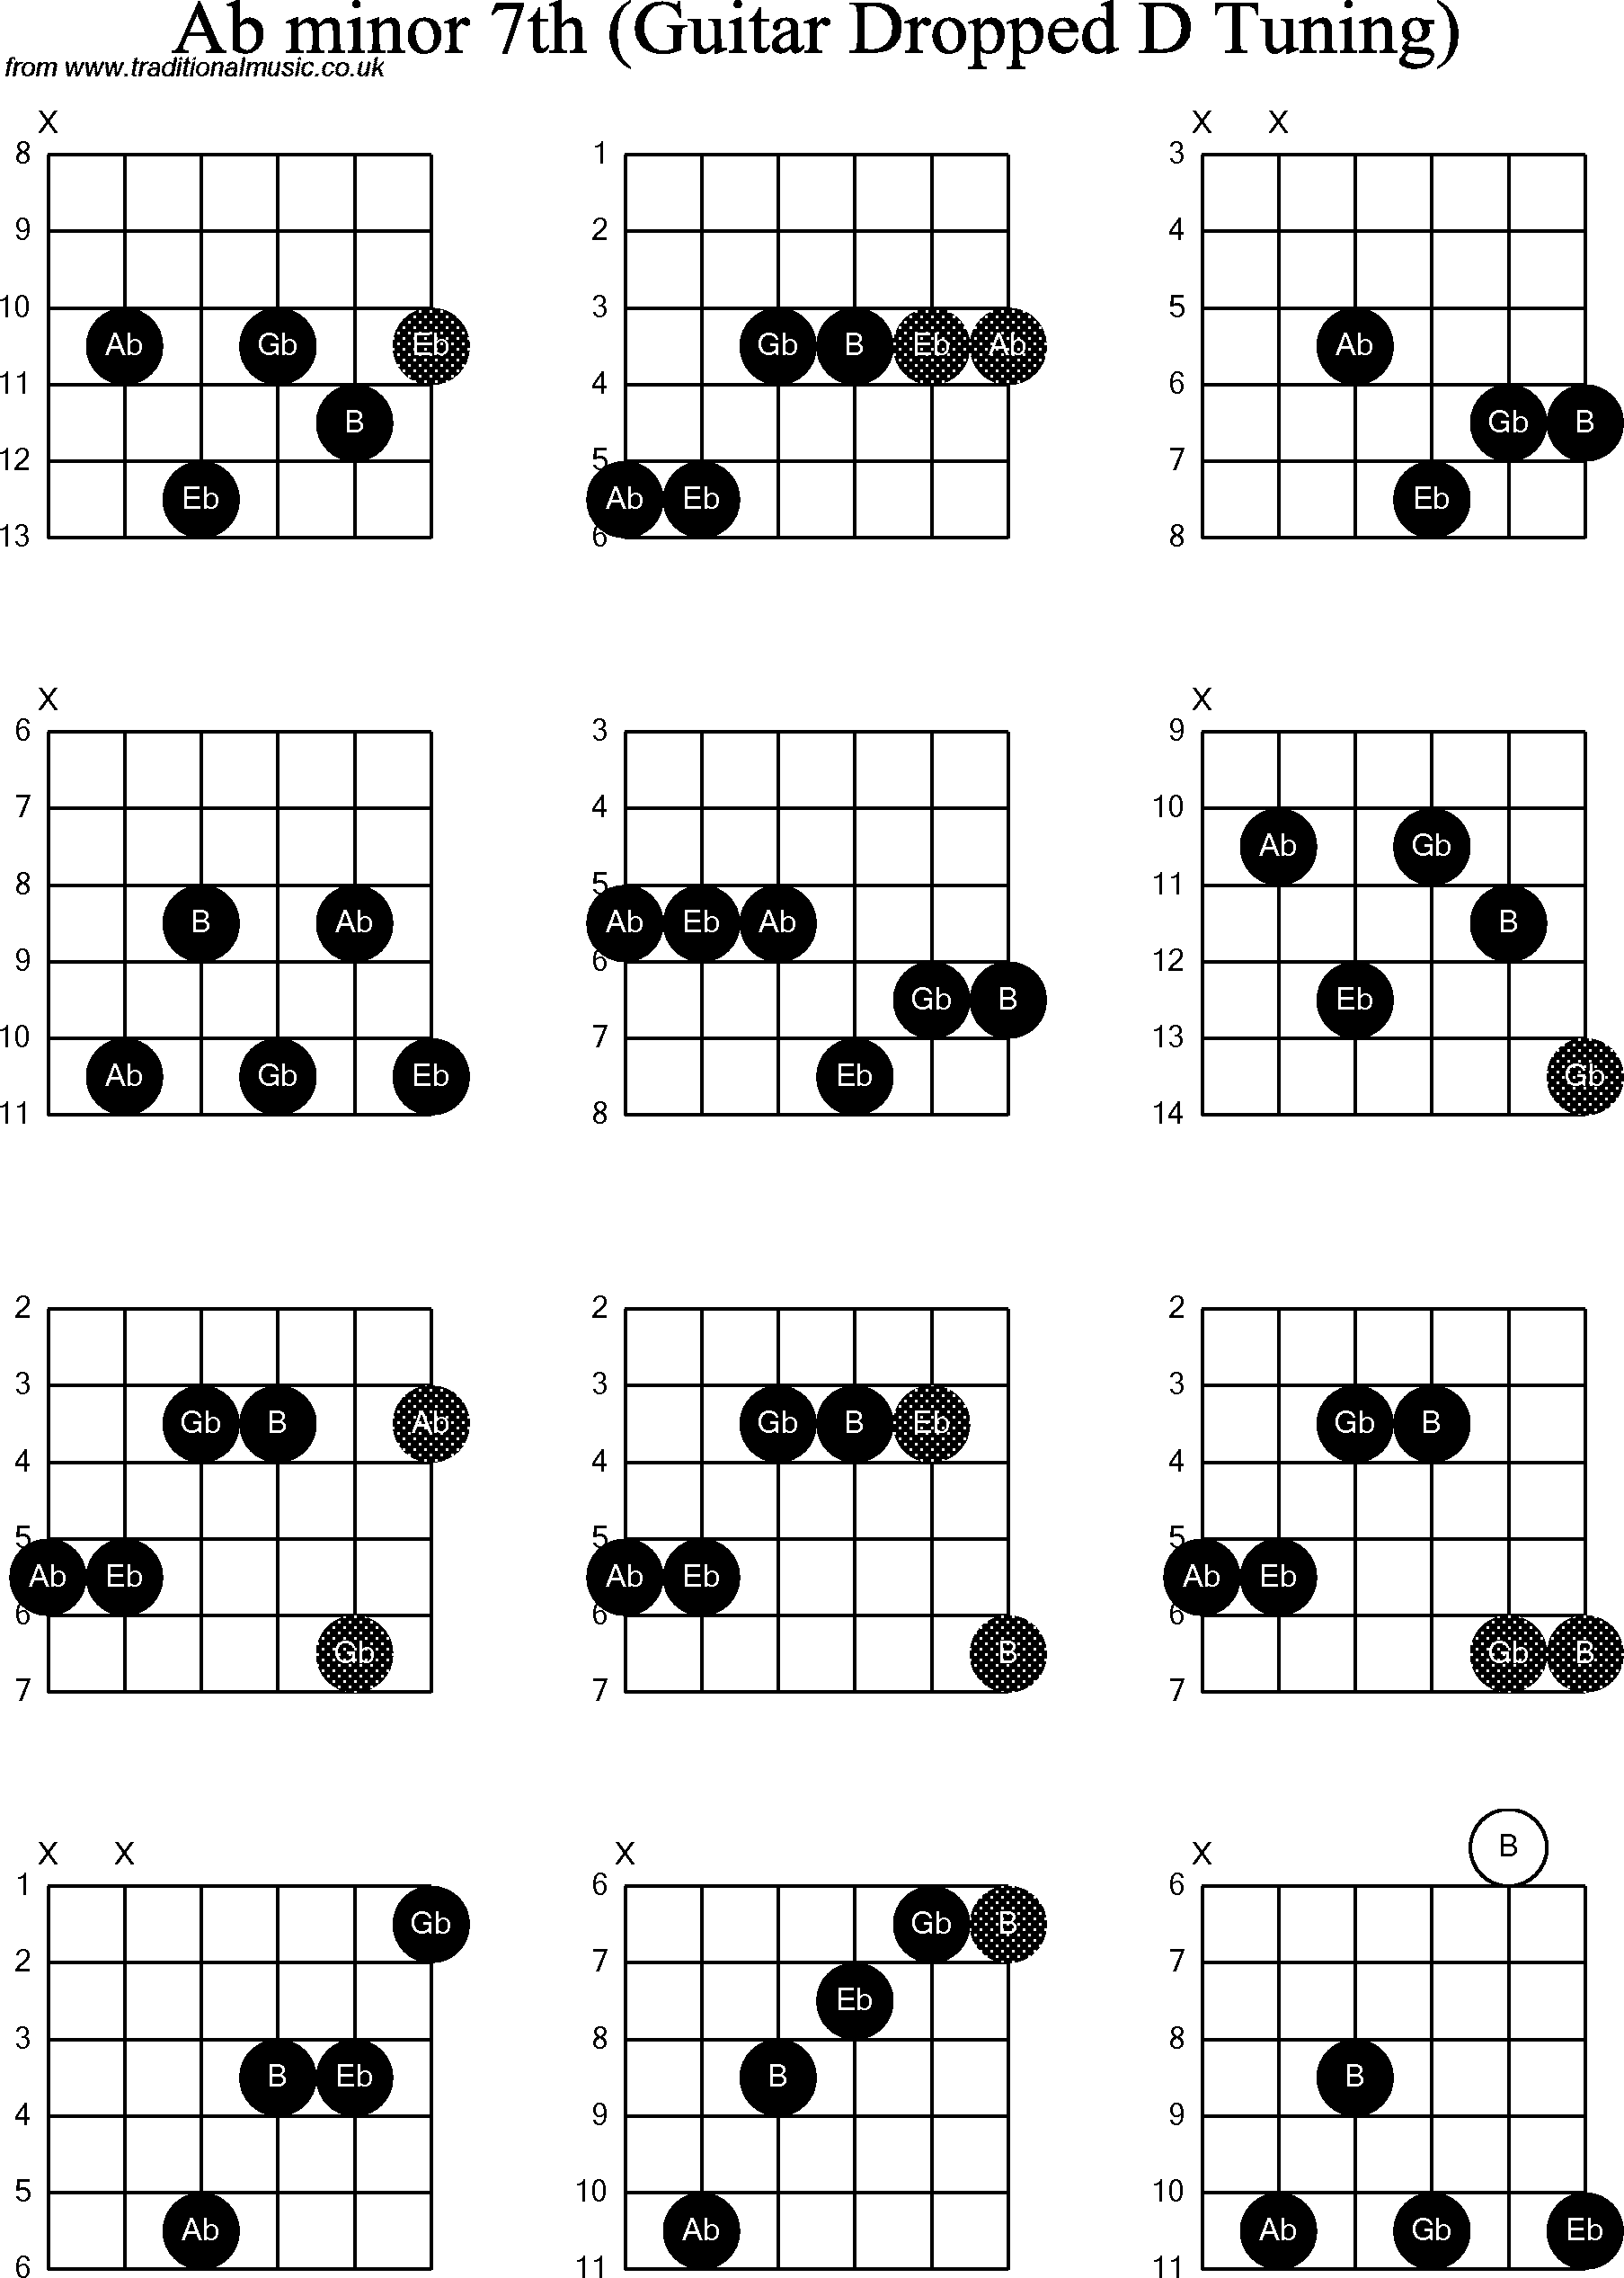 Chord diagrams for dropped D Guitar(DADGBE), Ab Minor7th